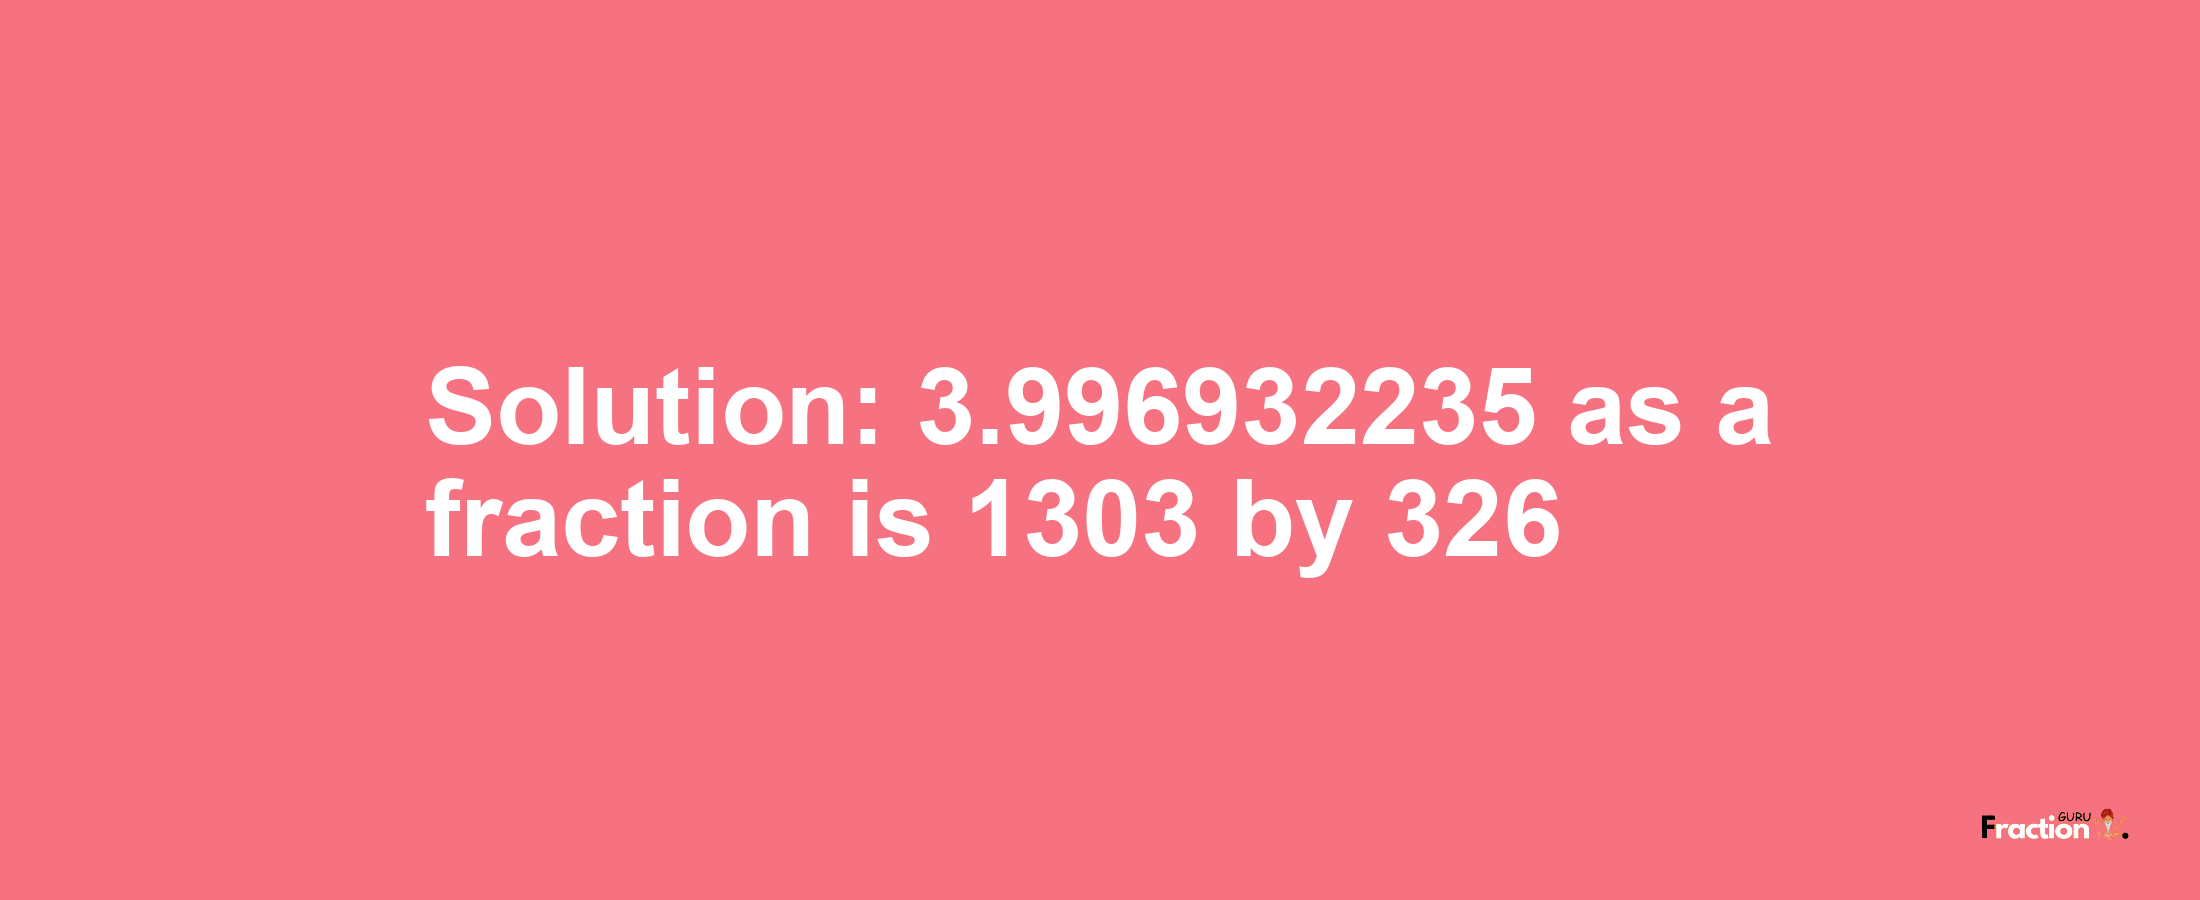 Solution:3.996932235 as a fraction is 1303/326